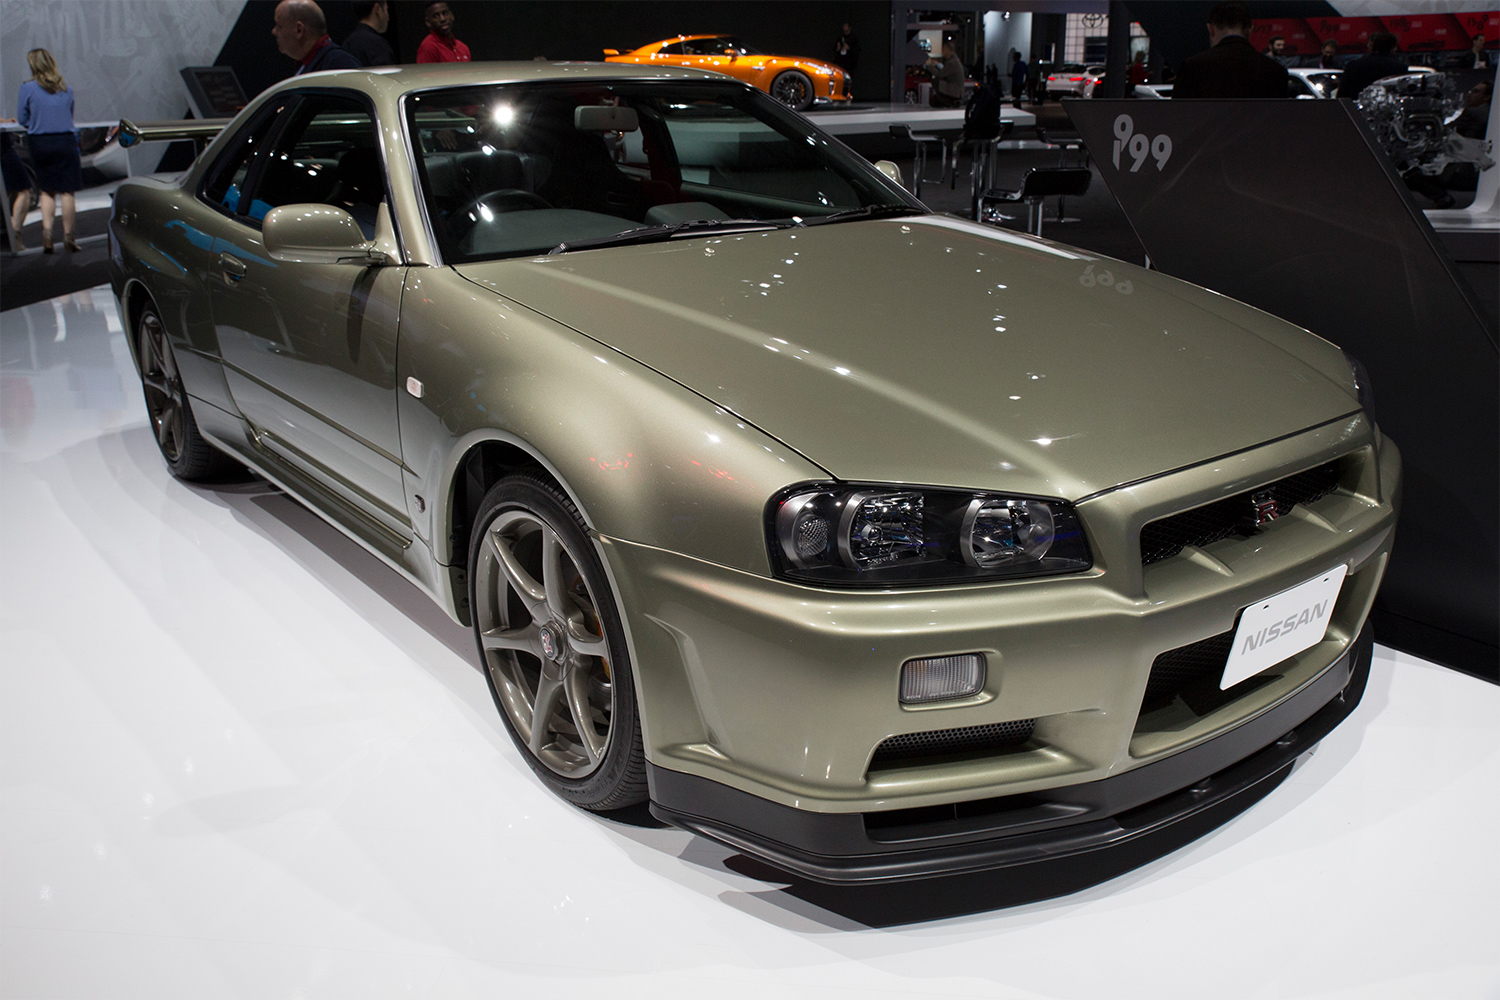 In 2024, the Millennial-Favorite Nissan R34 Skyline Will Be Legal